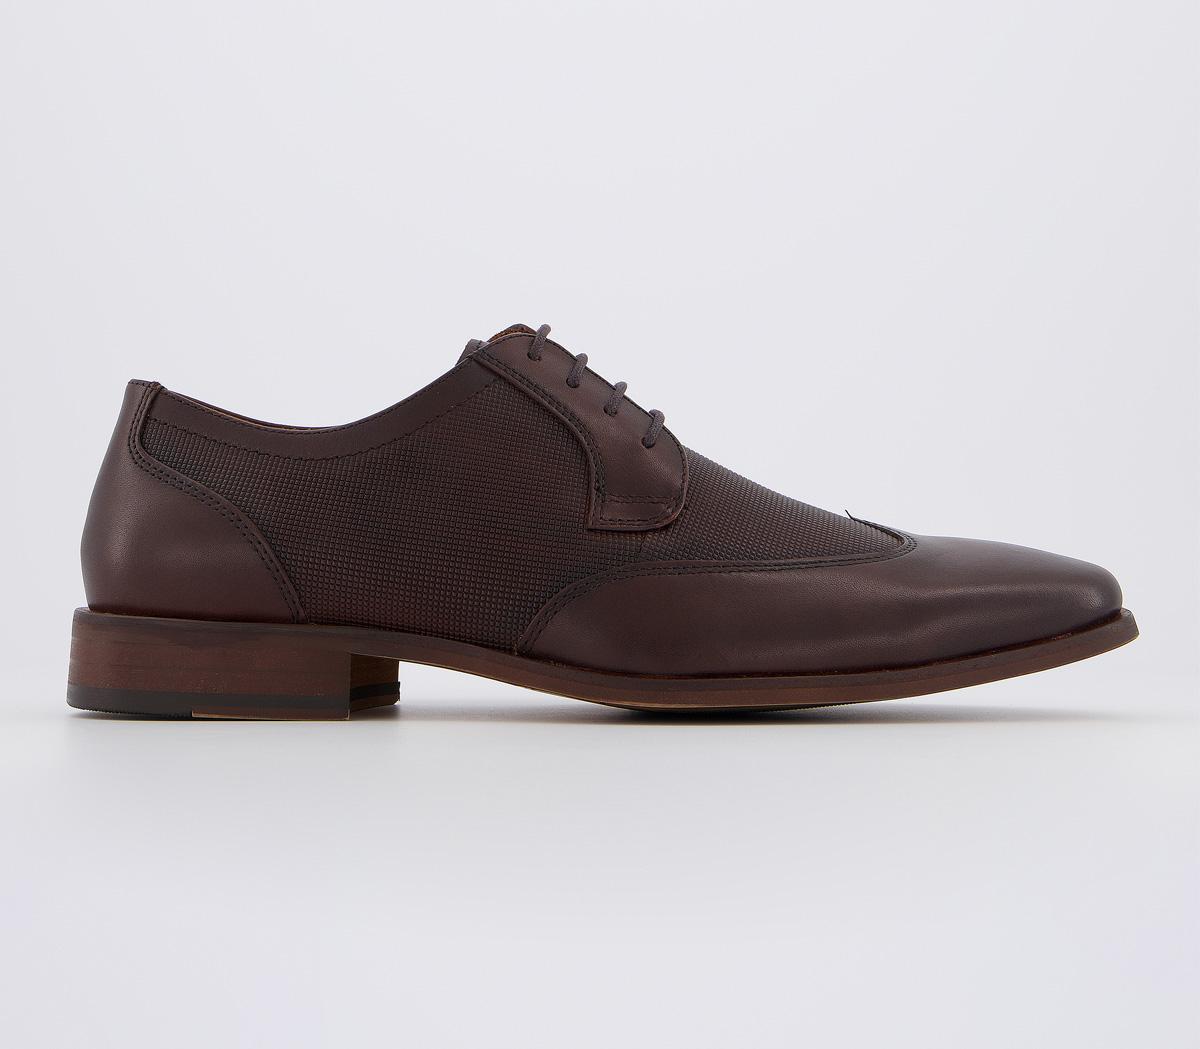 OFFICEMike Wingcap Derby ShoesBrown Leather